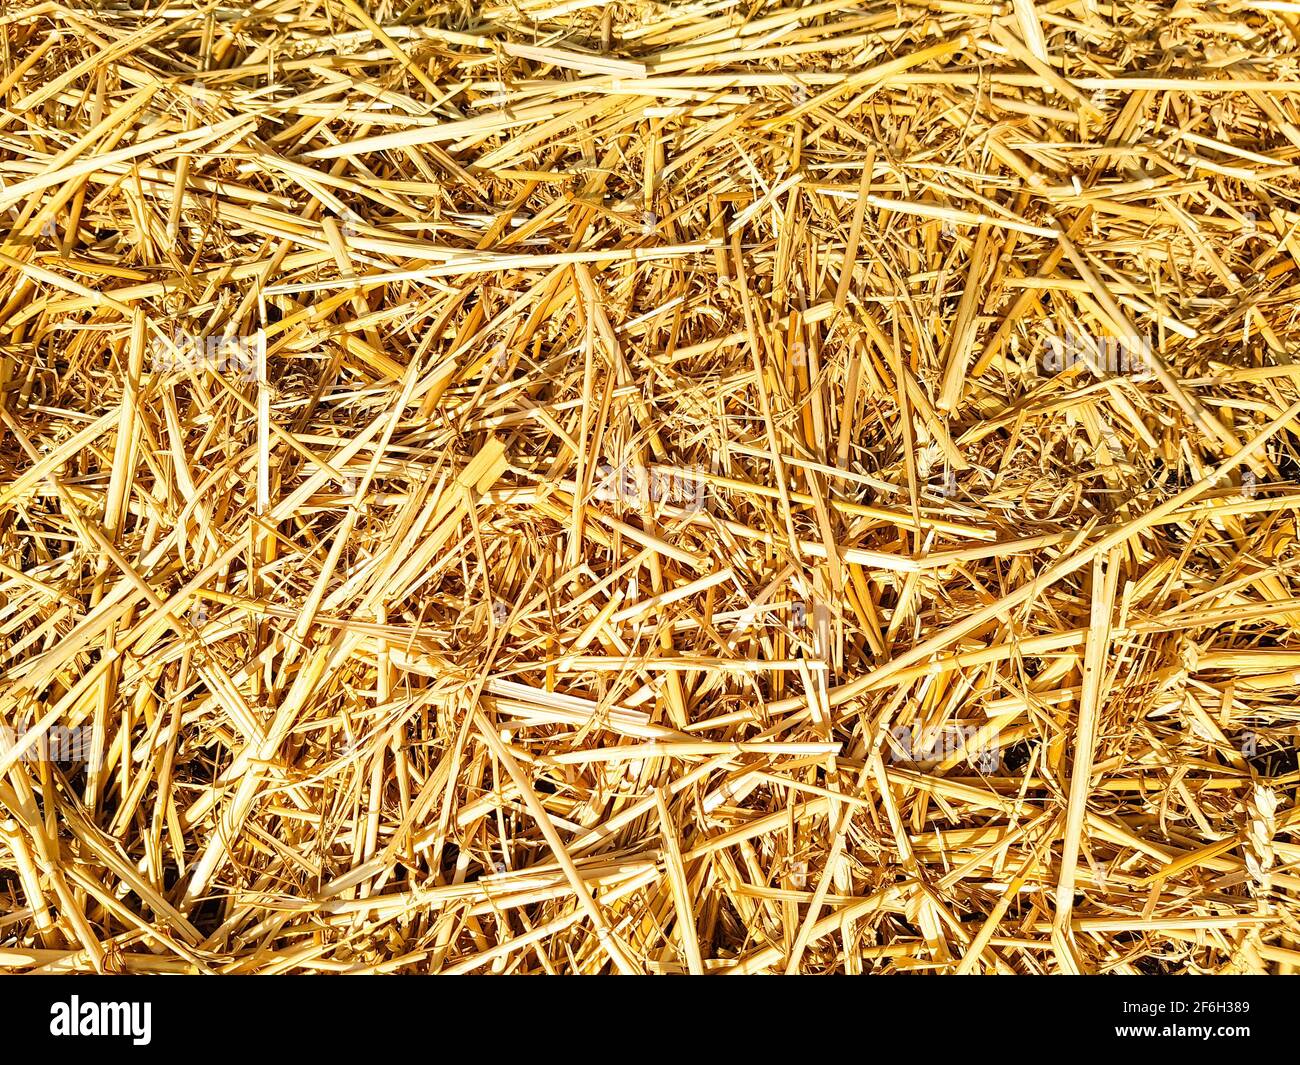 Straw hay bales yellow sun summer harvest harvest straw autumn autumnal dry background warm template nature cover cover flower beds garden Stock Photo